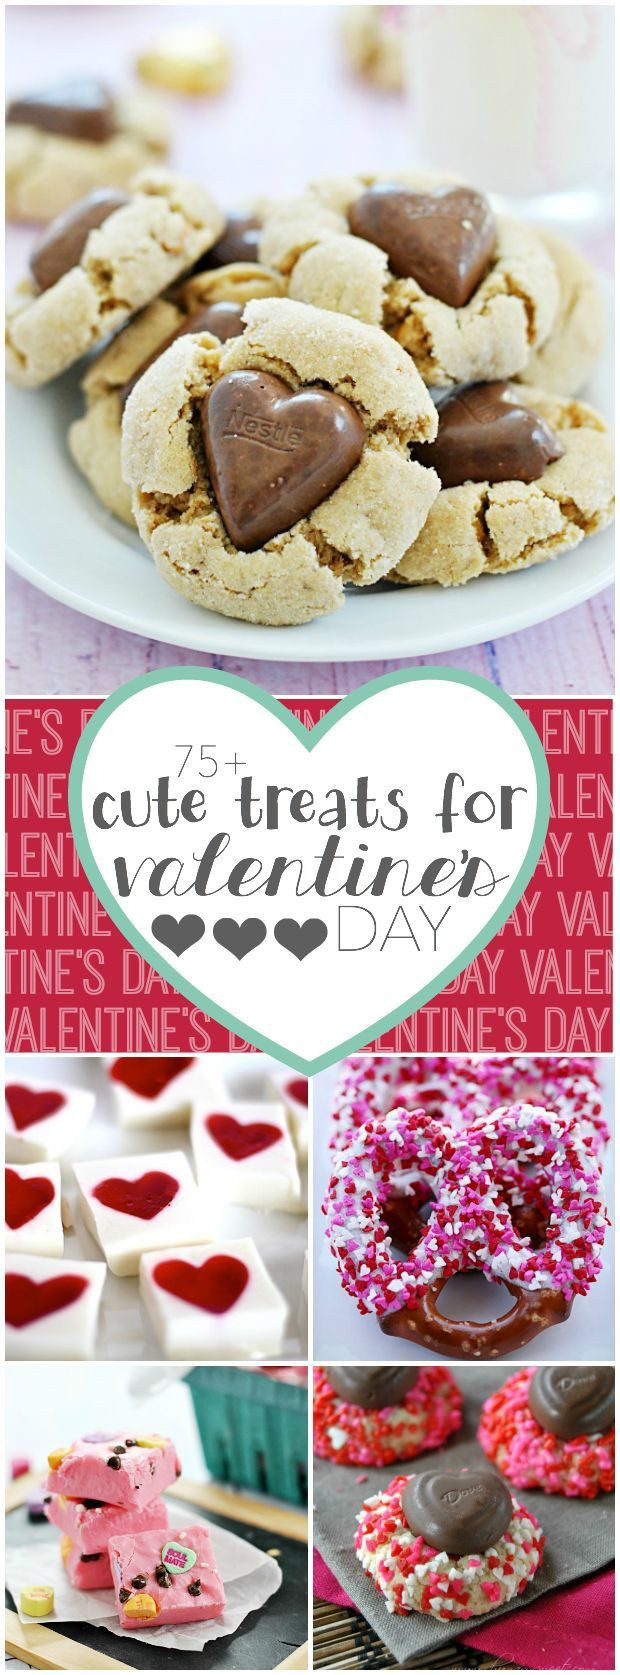 Valentines Food Gifts
 The Best Valentines Food Gifts Best Round Up Recipe